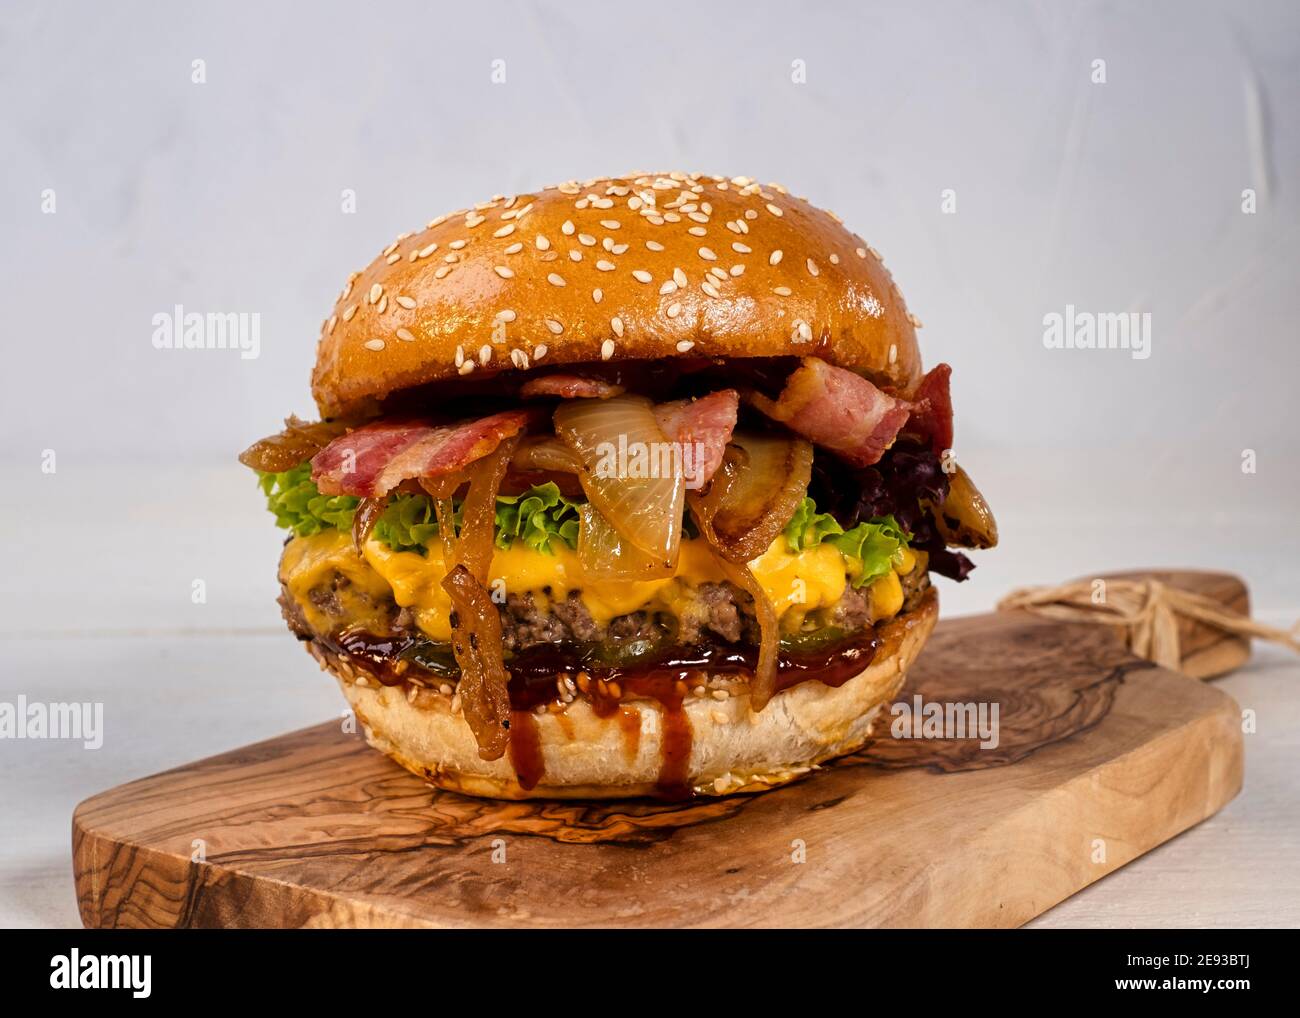 Juicy cheese burger with beef and bacon, tomatoes, cucumbers and onions nicely arranged on a wooden board on a white background Stock Photo